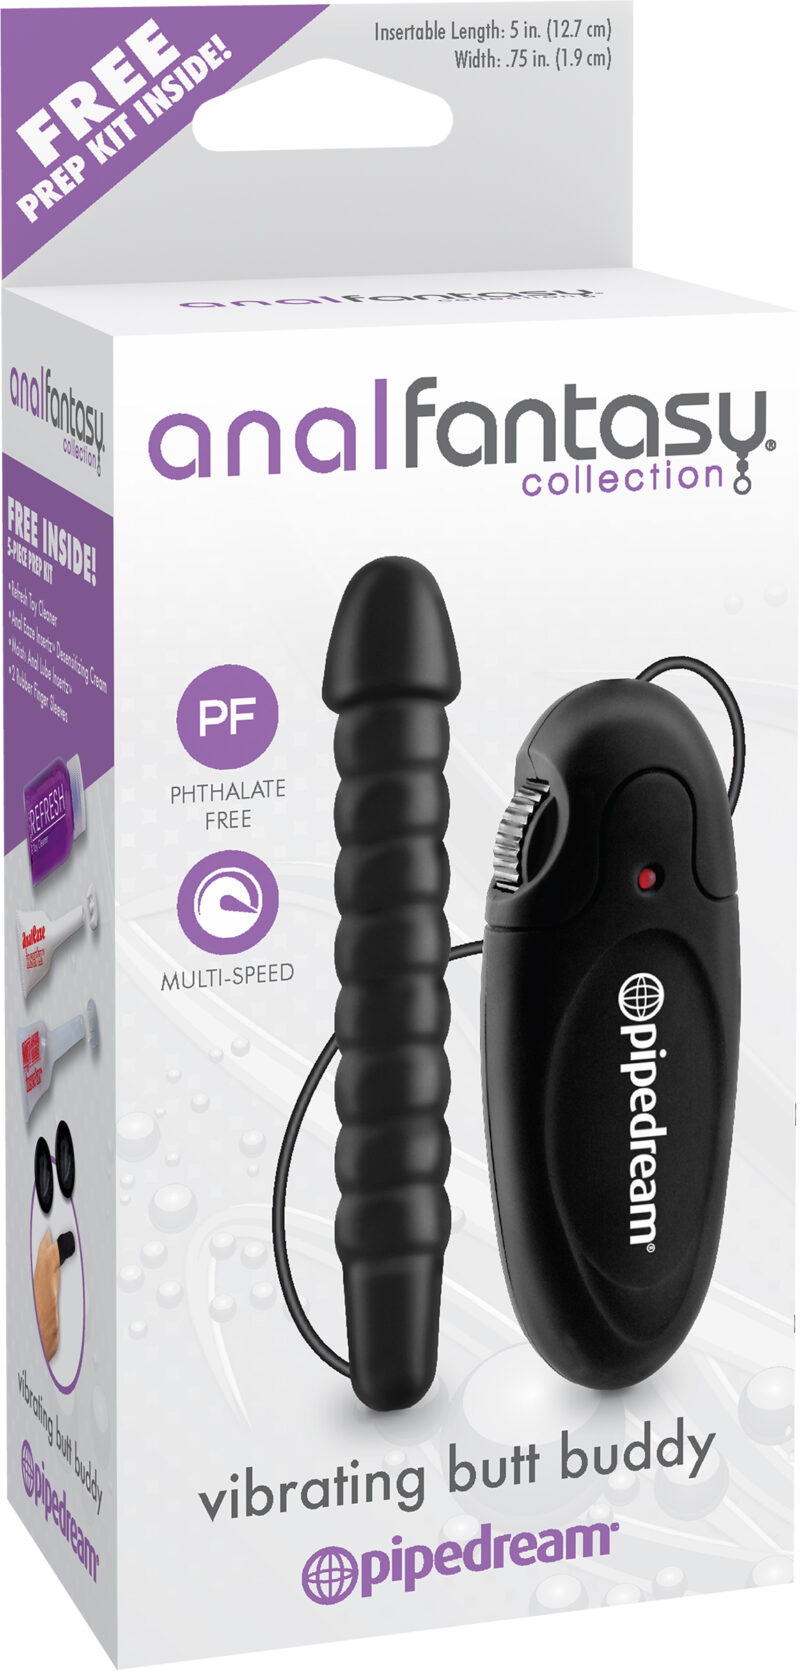 Pipedream Anal Fantasy Vibrating Butt Buddy